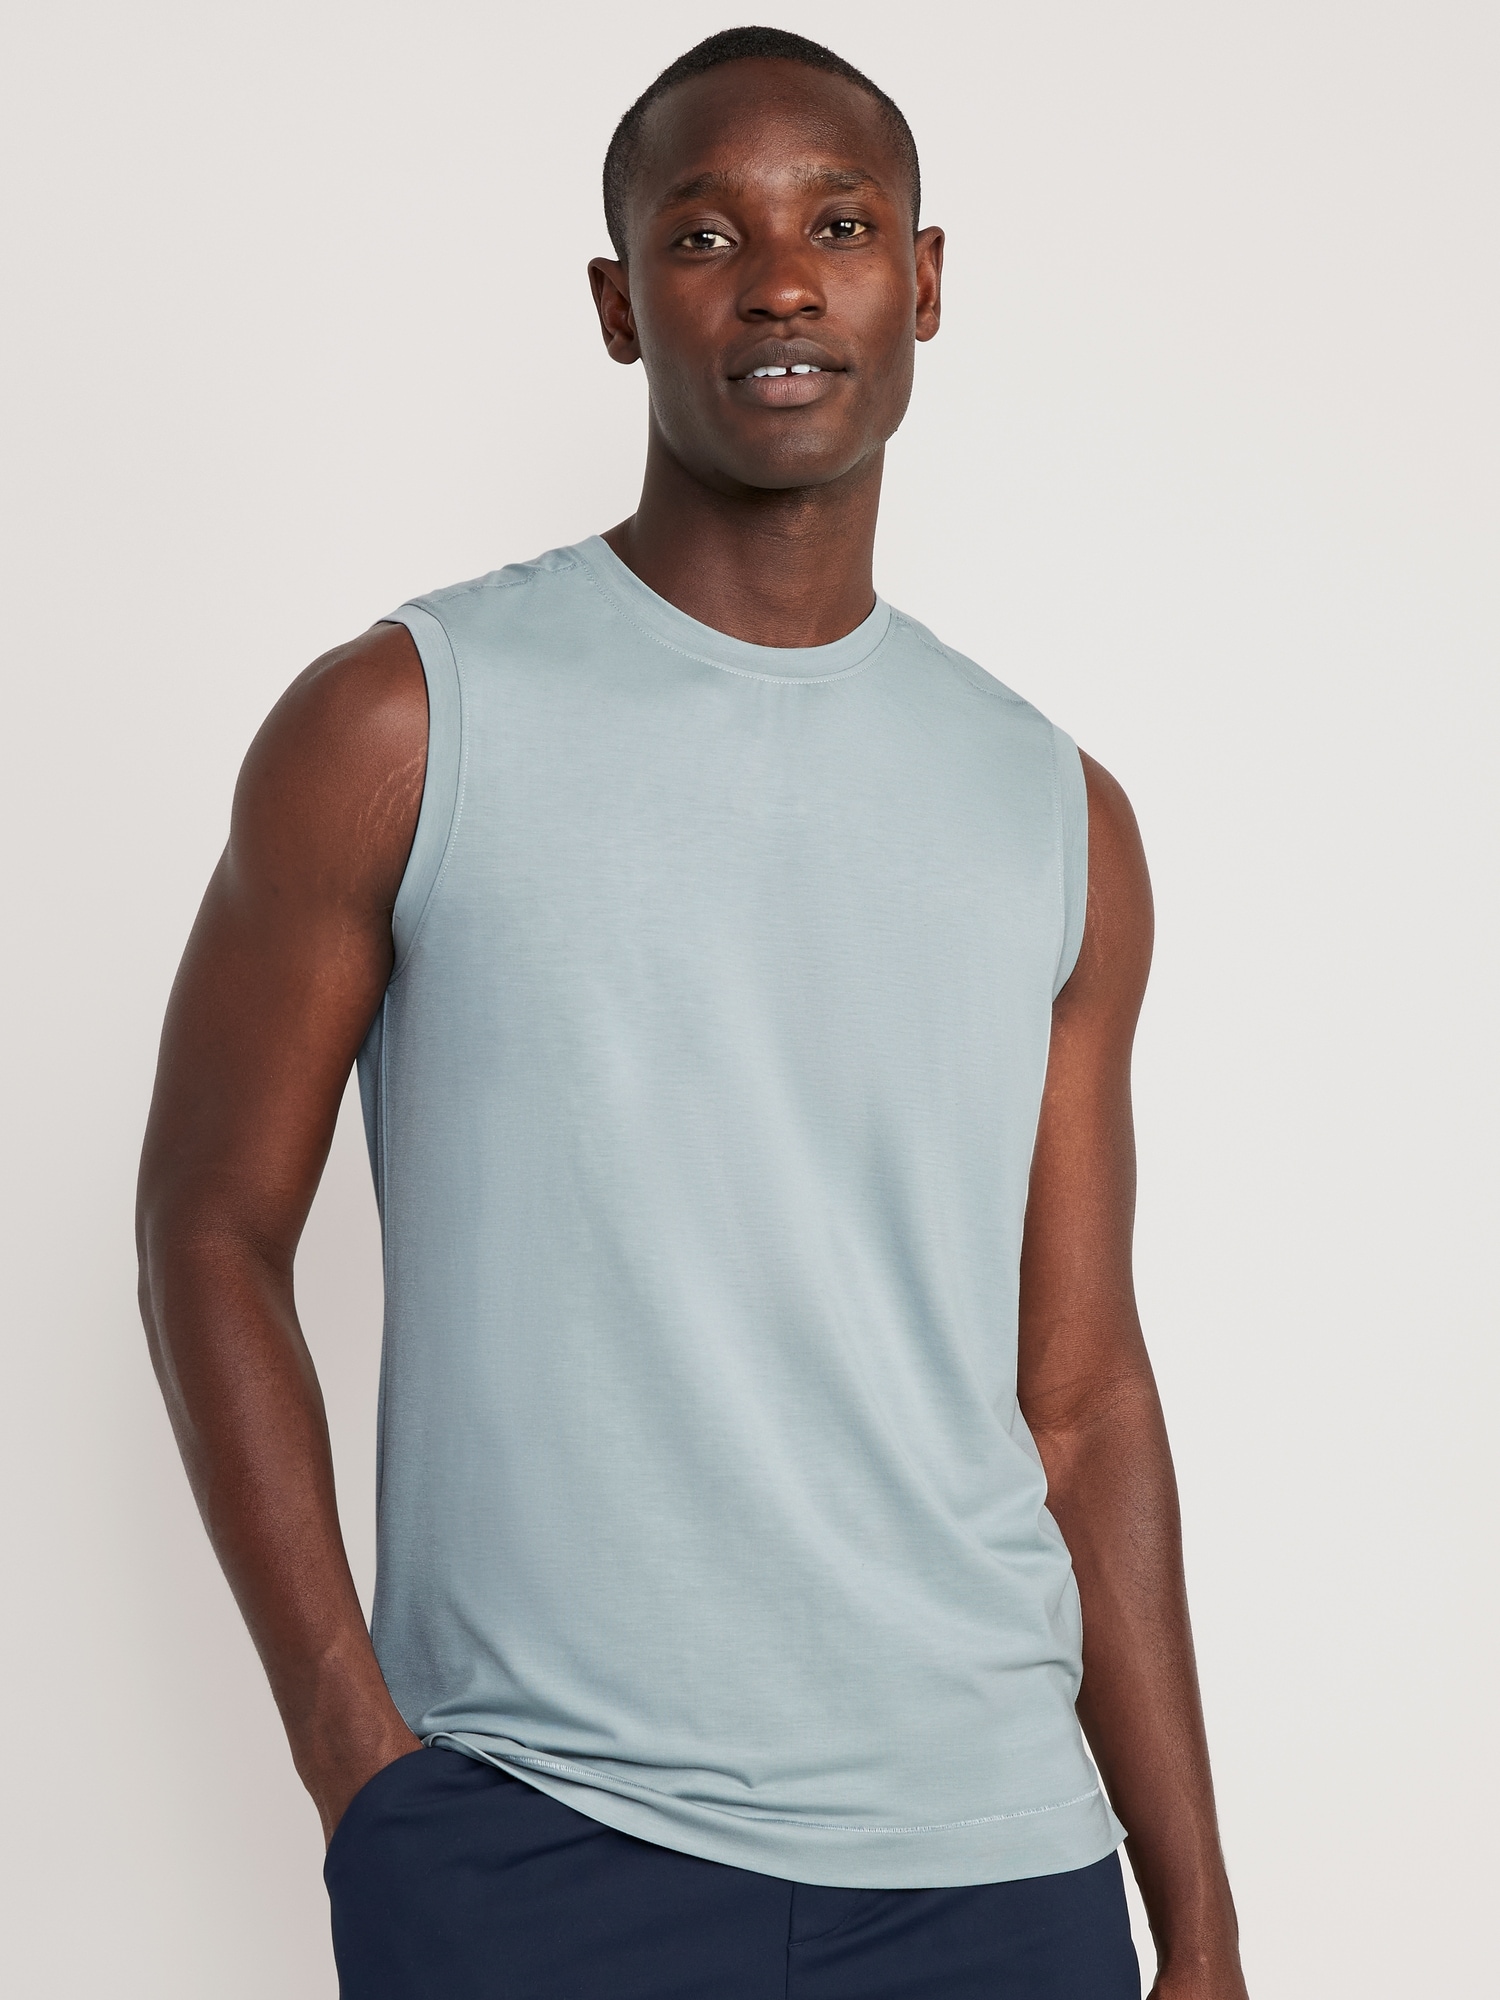 Men's Stretch Muscle Tank Top